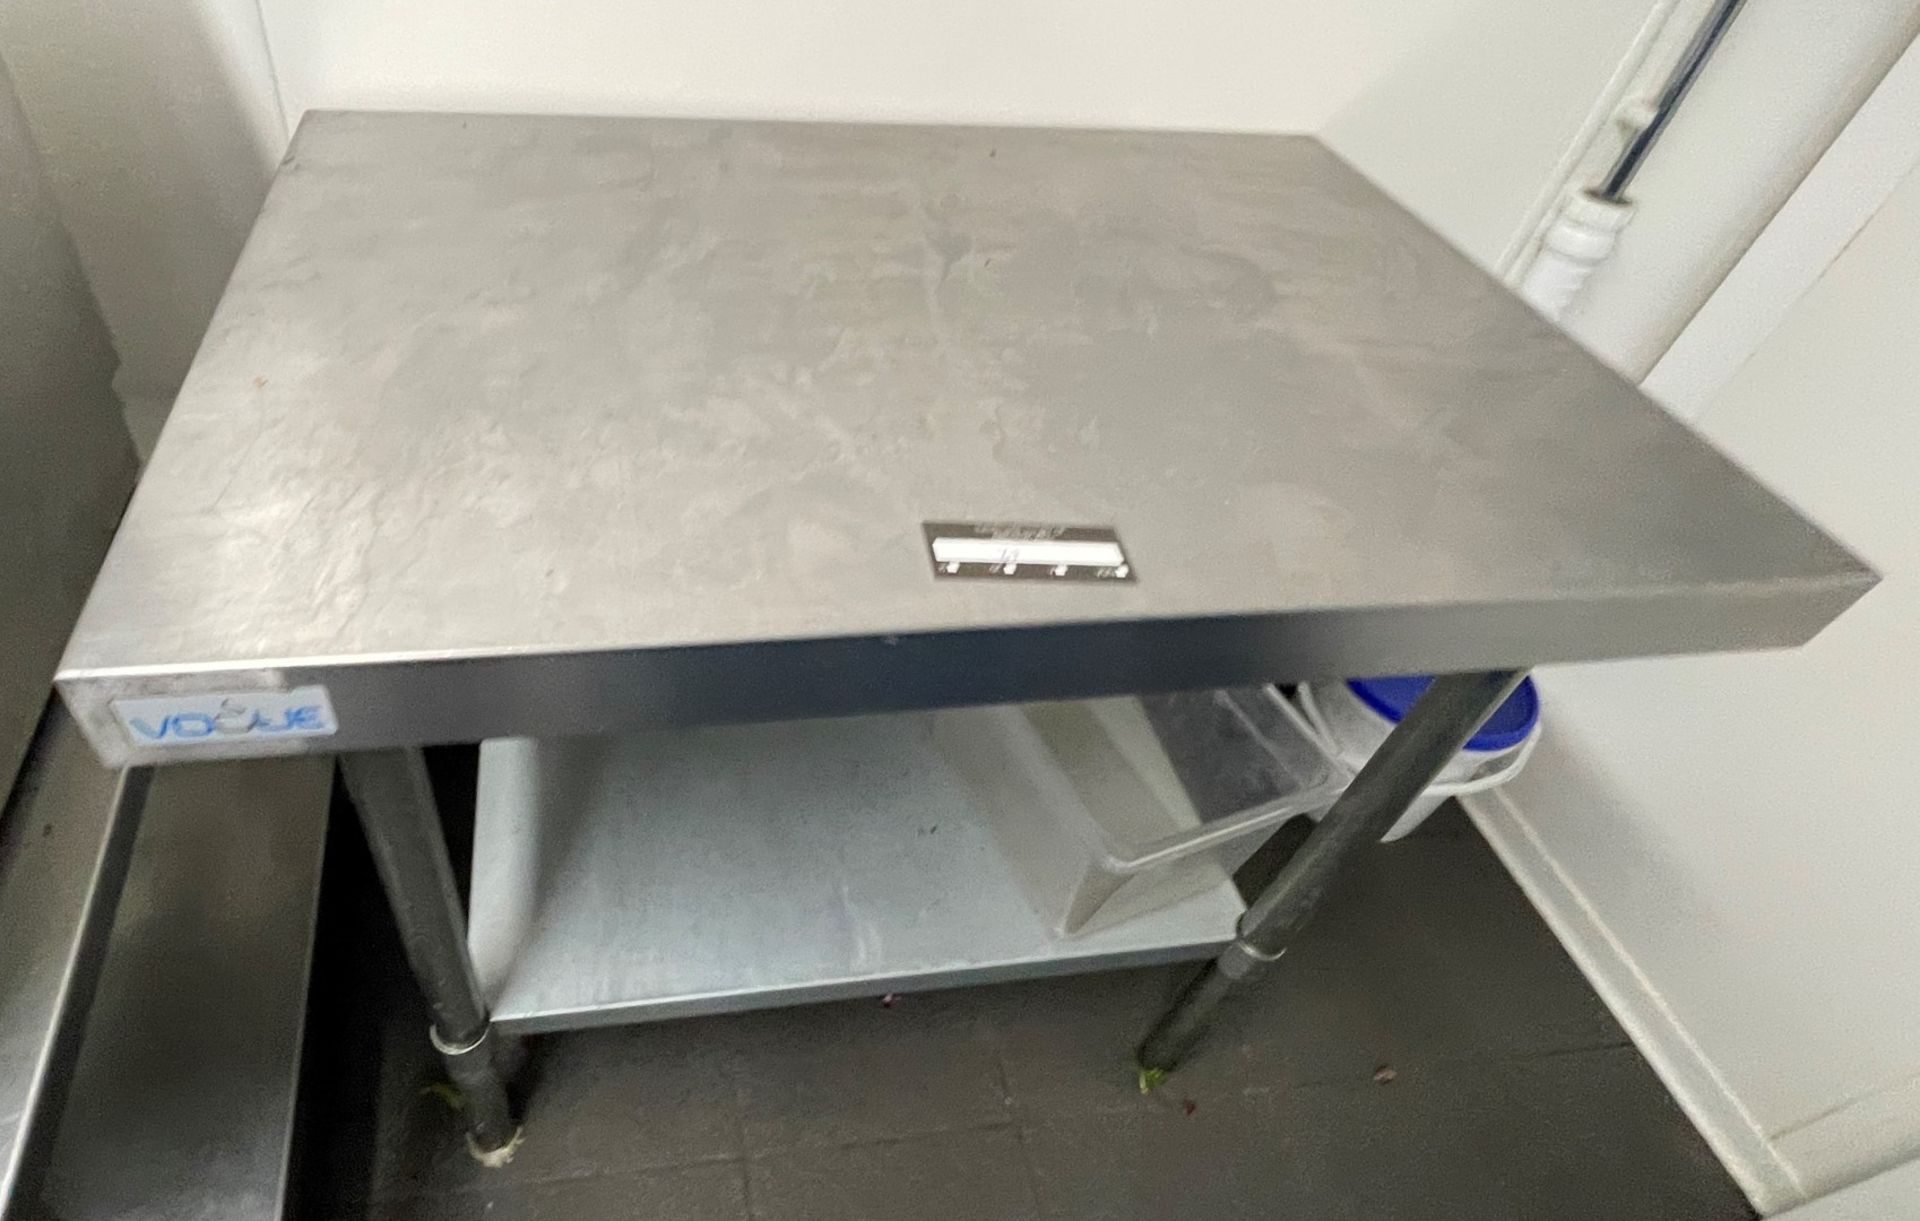 1 x Vogue Stainless Steel Prep Table - Size: 90x60 cms - Image 3 of 3